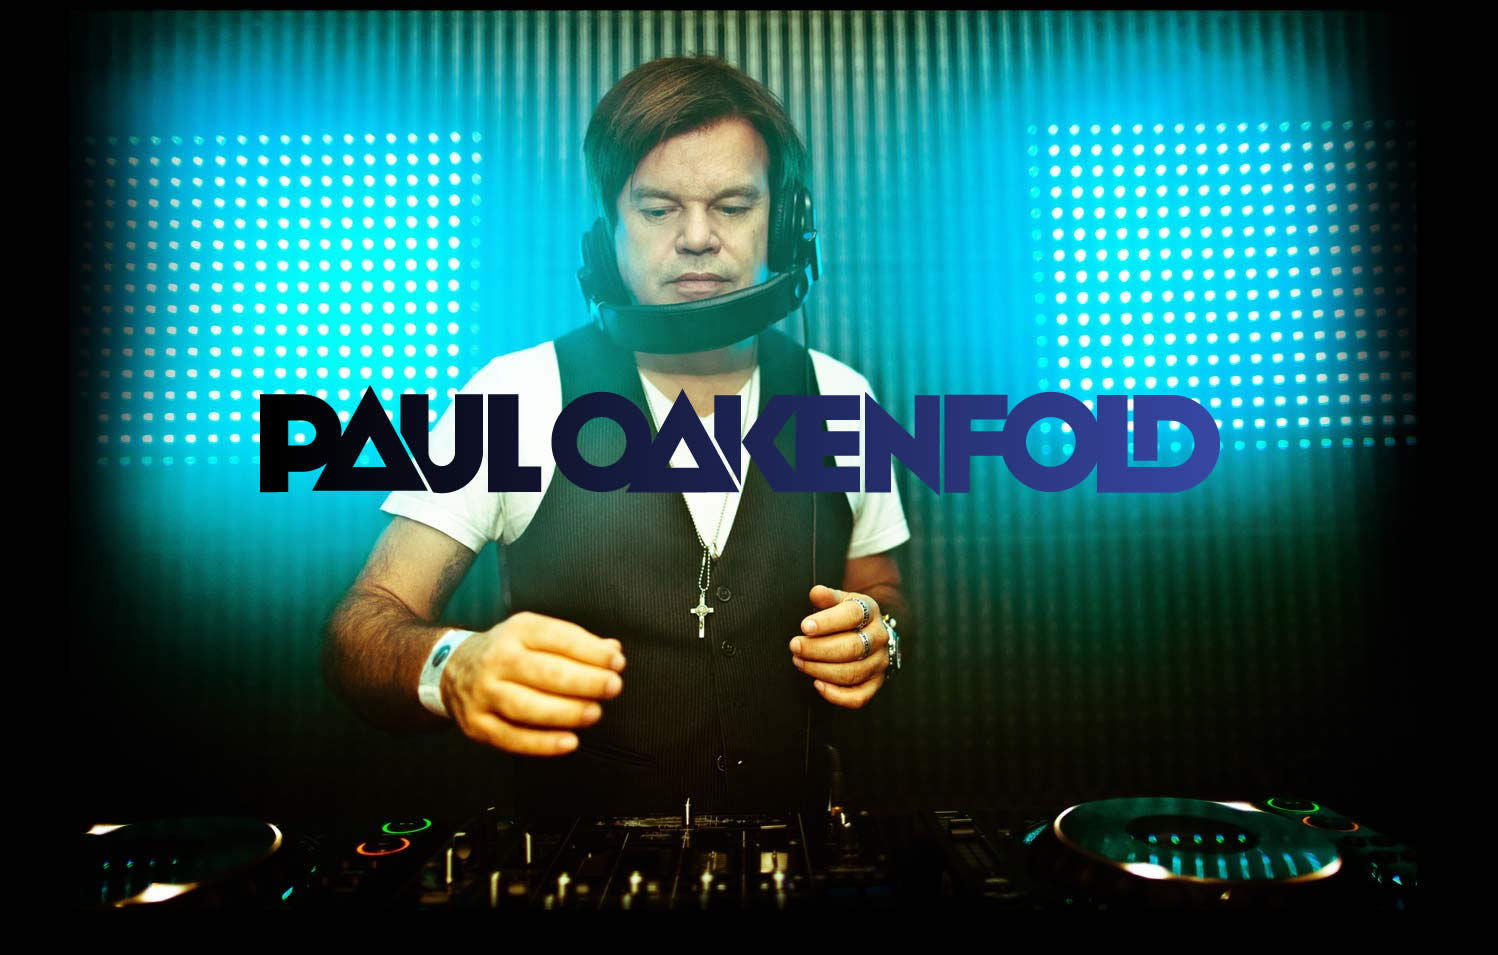 Paul Oakenfold – Revisiting the golden era of trance music